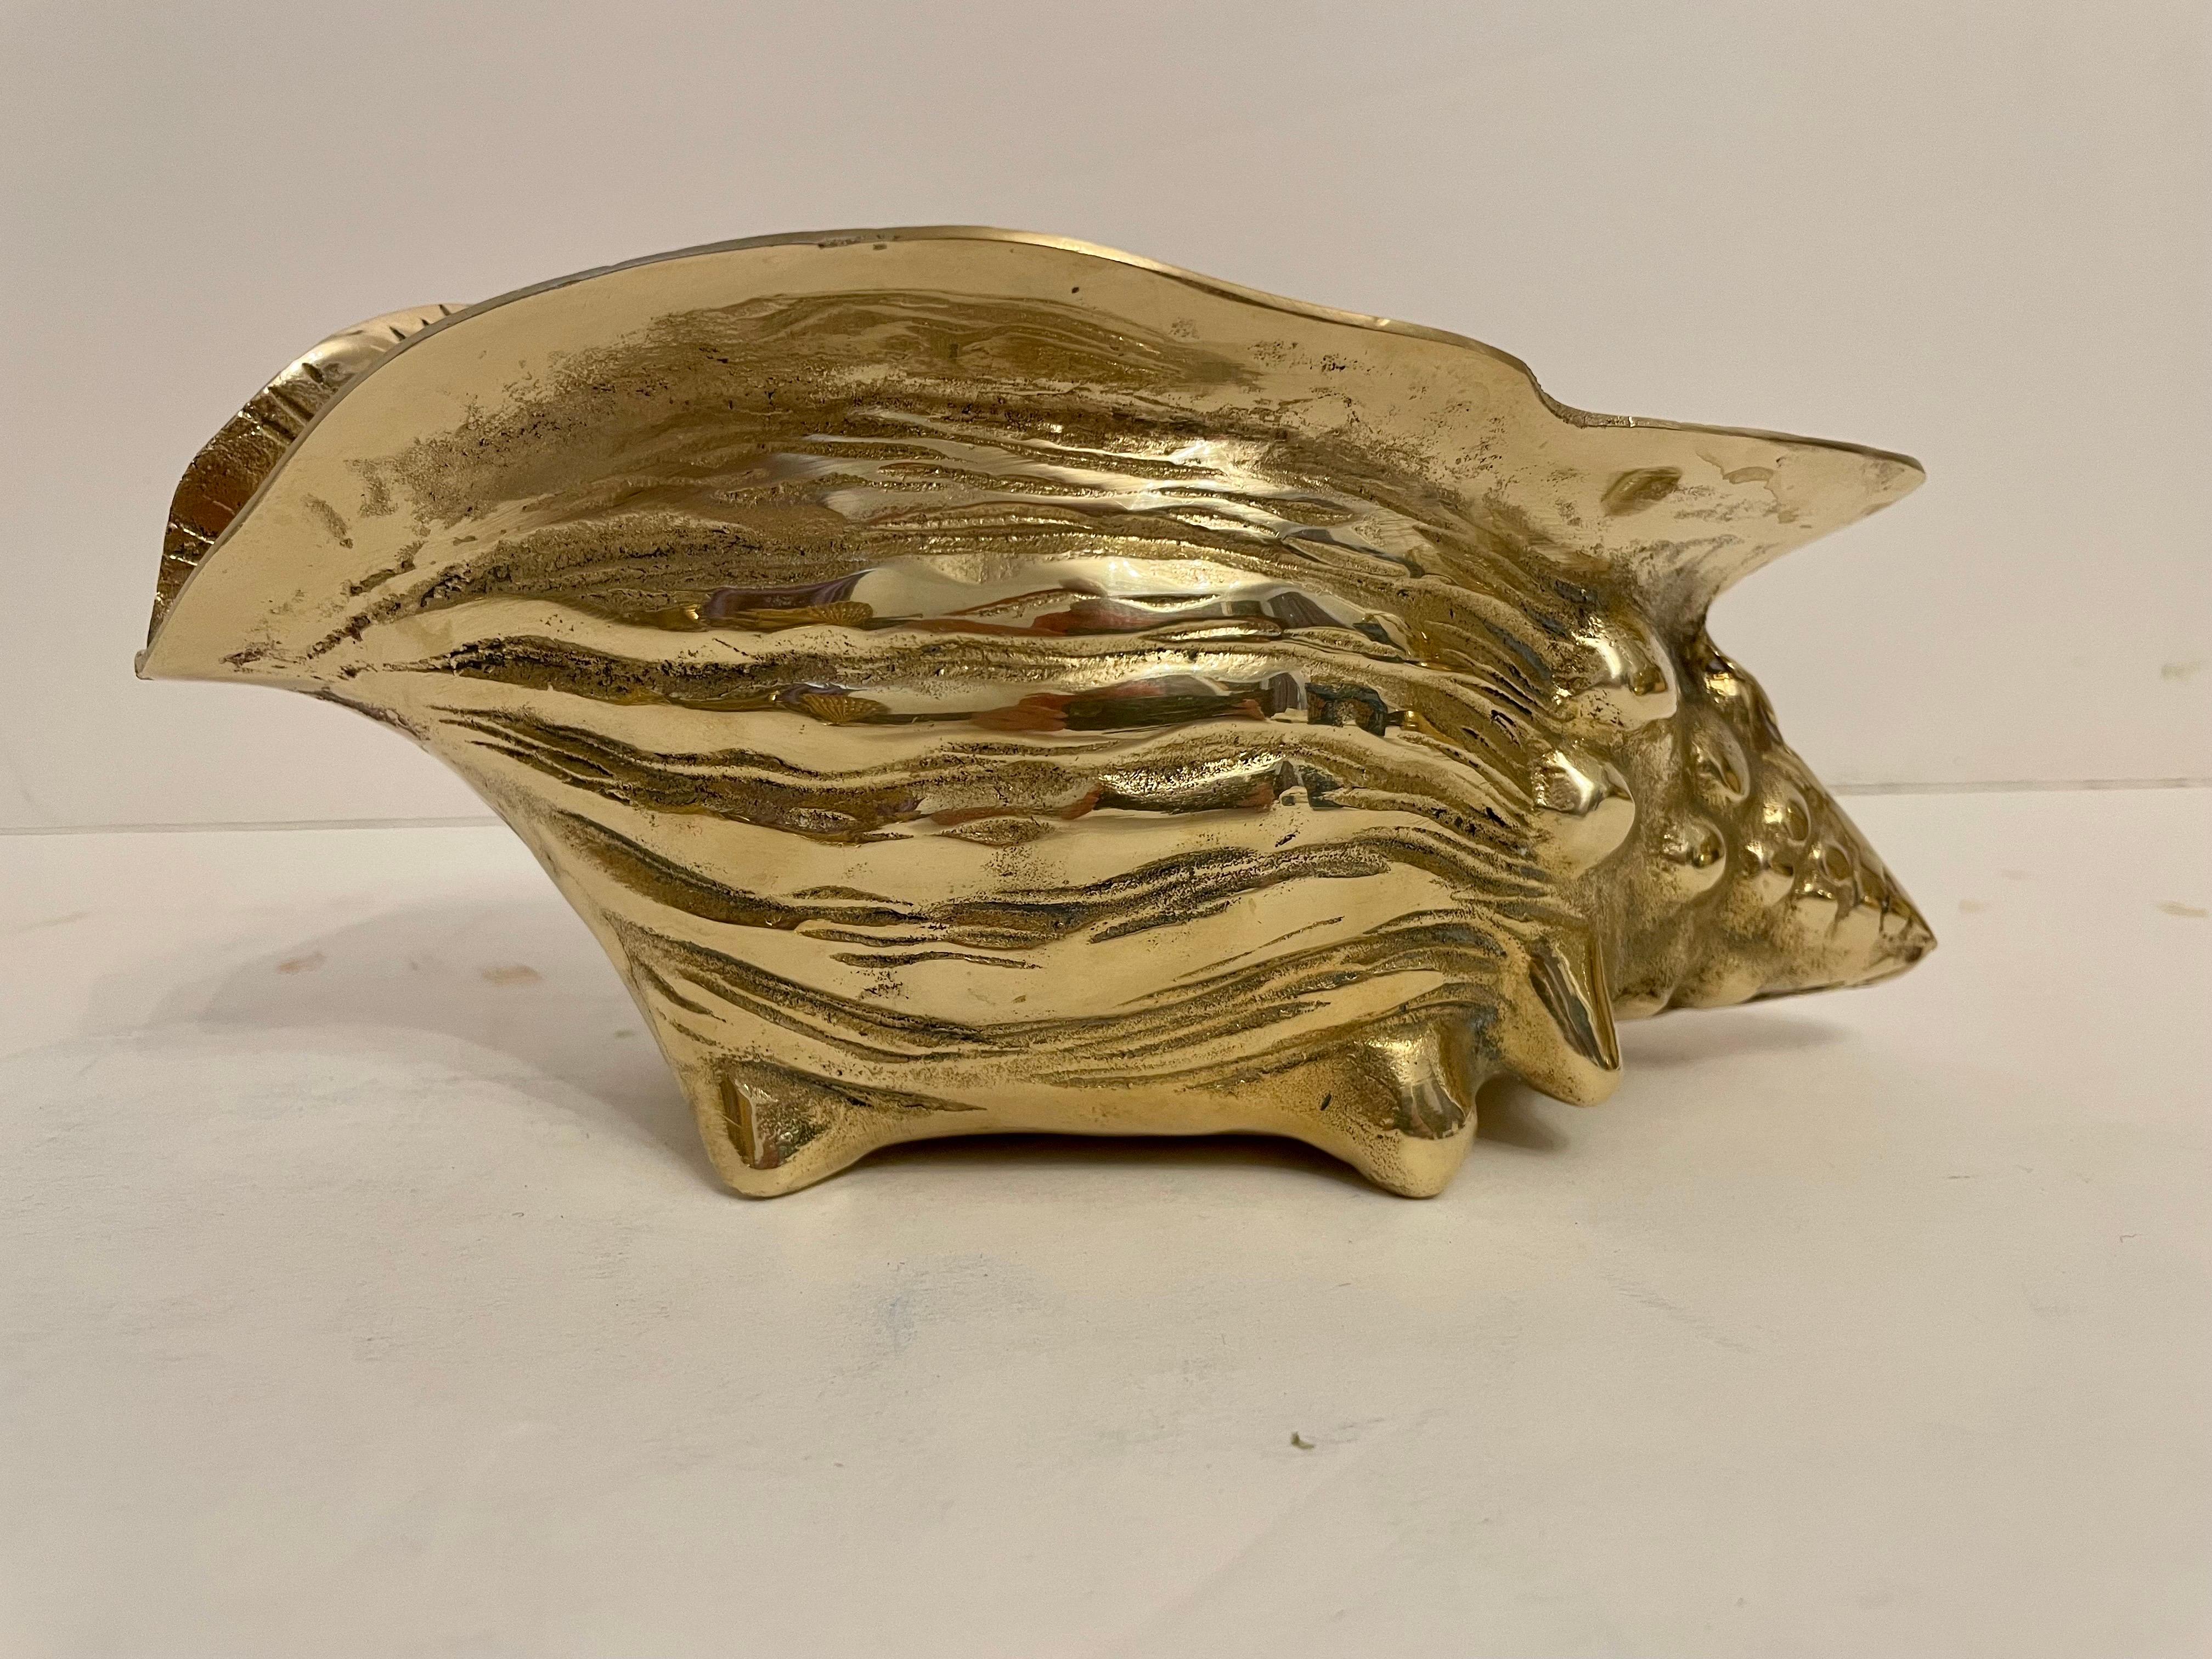 Hollywood Regency vintage brass seashell nautilus planter. Very detailed. Good overall condition with minor wear to from age and use. Can be used inside or out. Great for air plants. 9” wide x 4.5 wide x 4” tall.